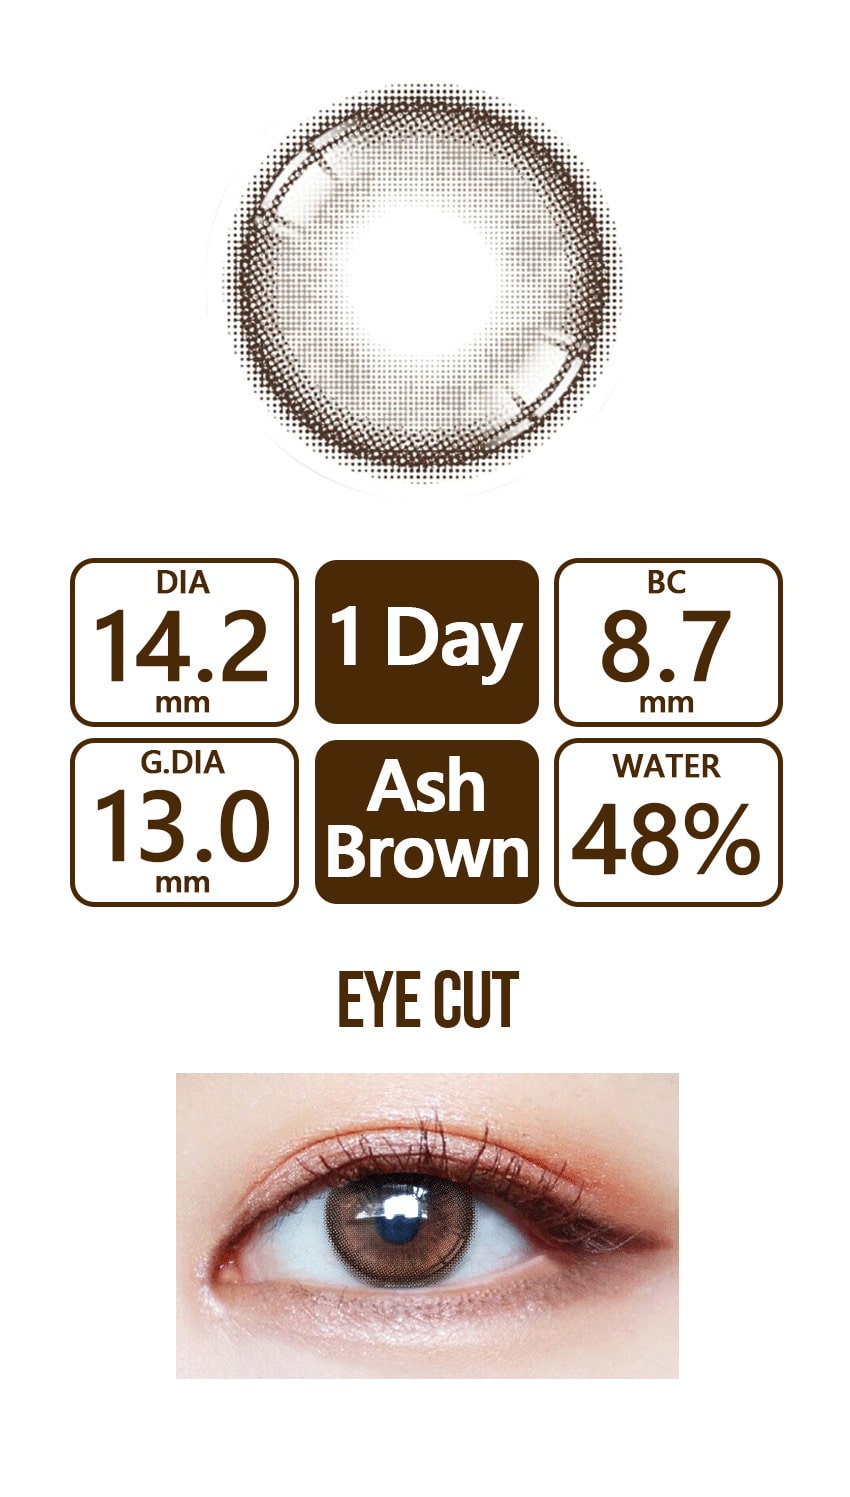  queenslens, queencontacts,Seethrough,Ash Brown,contacts,hapakristin, 1Day,kristin